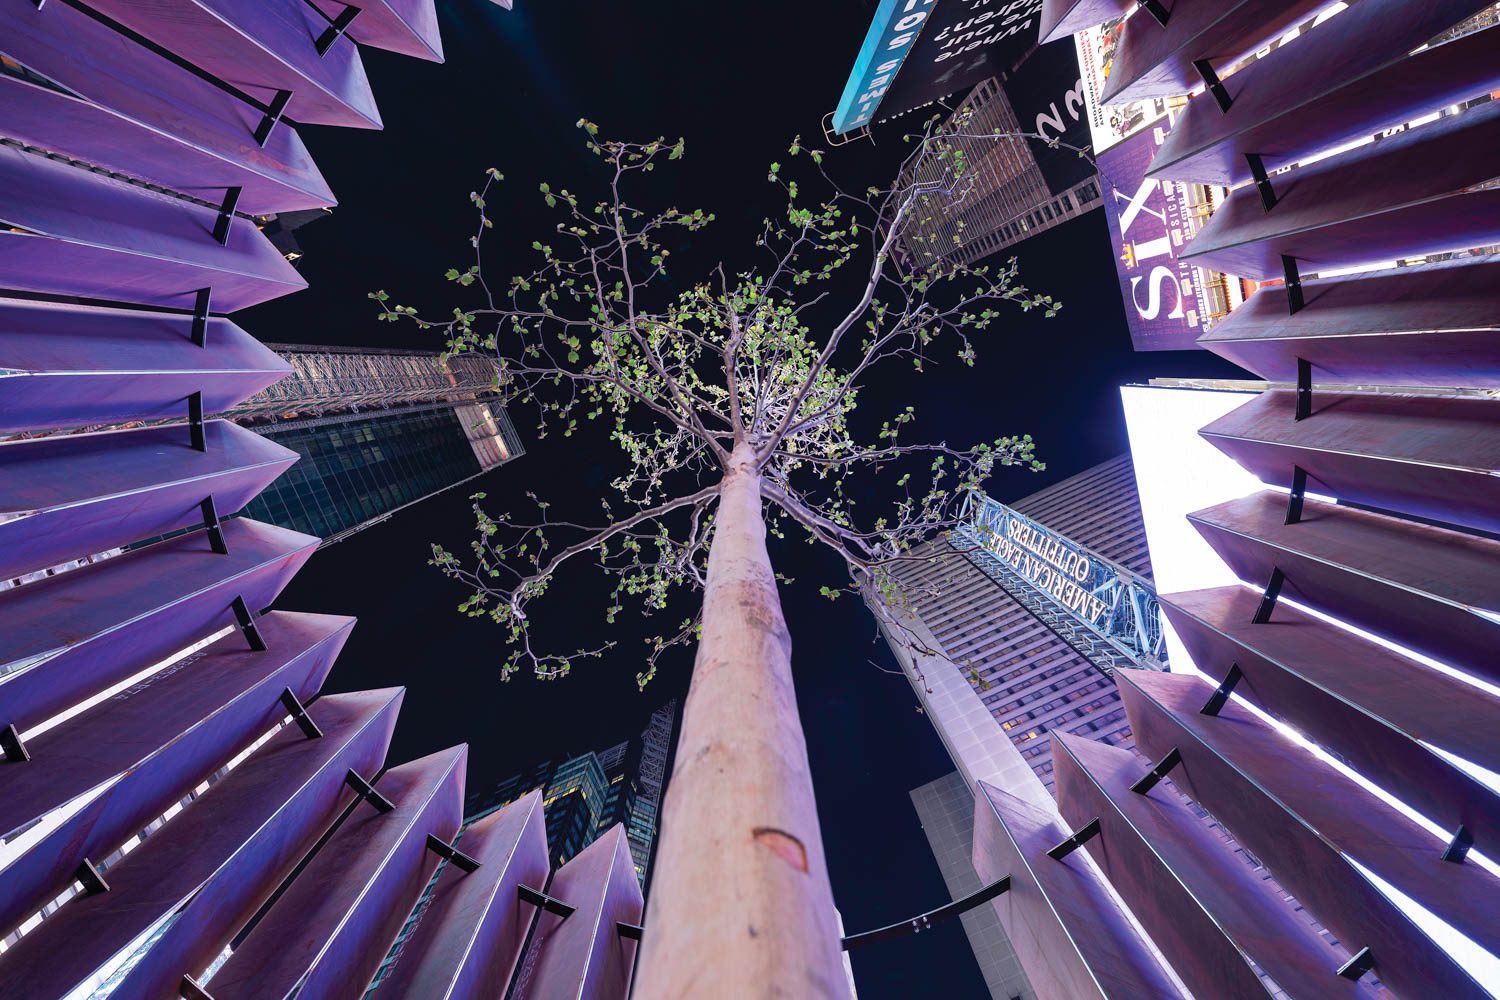 The centerpiece was a 20-foot-tall, certified organic London planetree